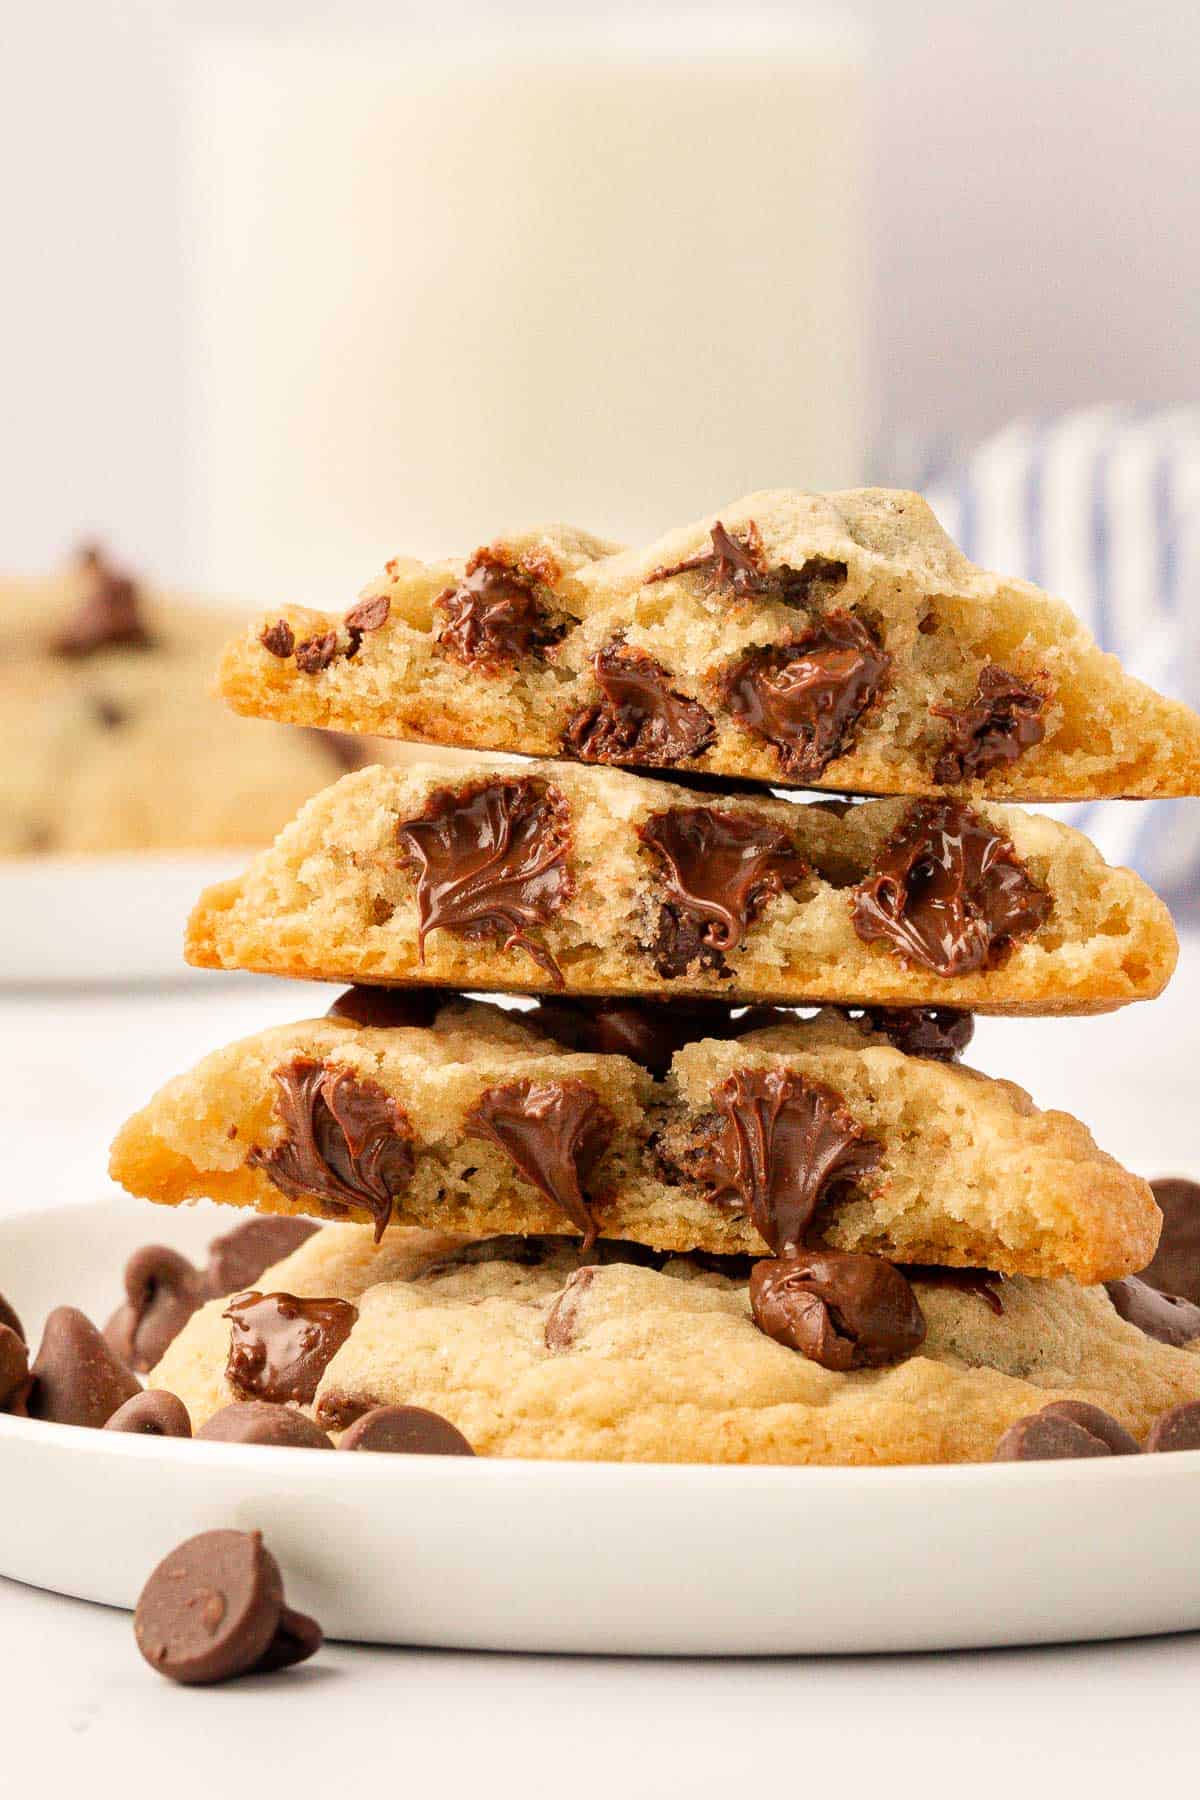 chocolate chip cookies broken open to show the melted chocolate chips